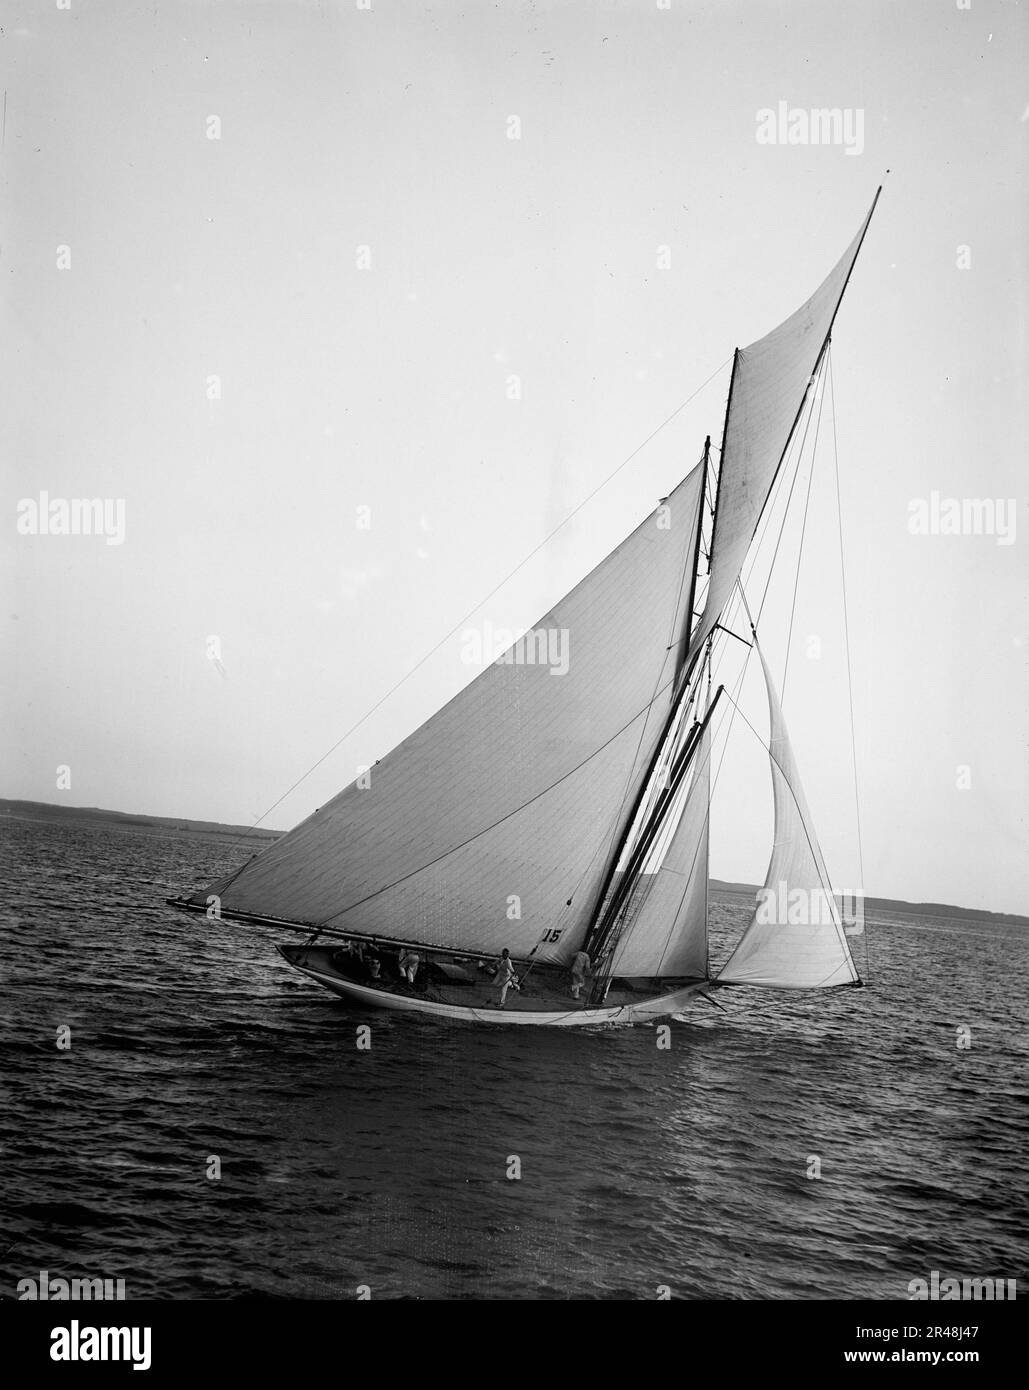 Mariquita, between 1890 and 1900. 'Mariquita' was designed by William Fife III and is the only surviving 19-metre class yacht of the six that were built. Stock Photo